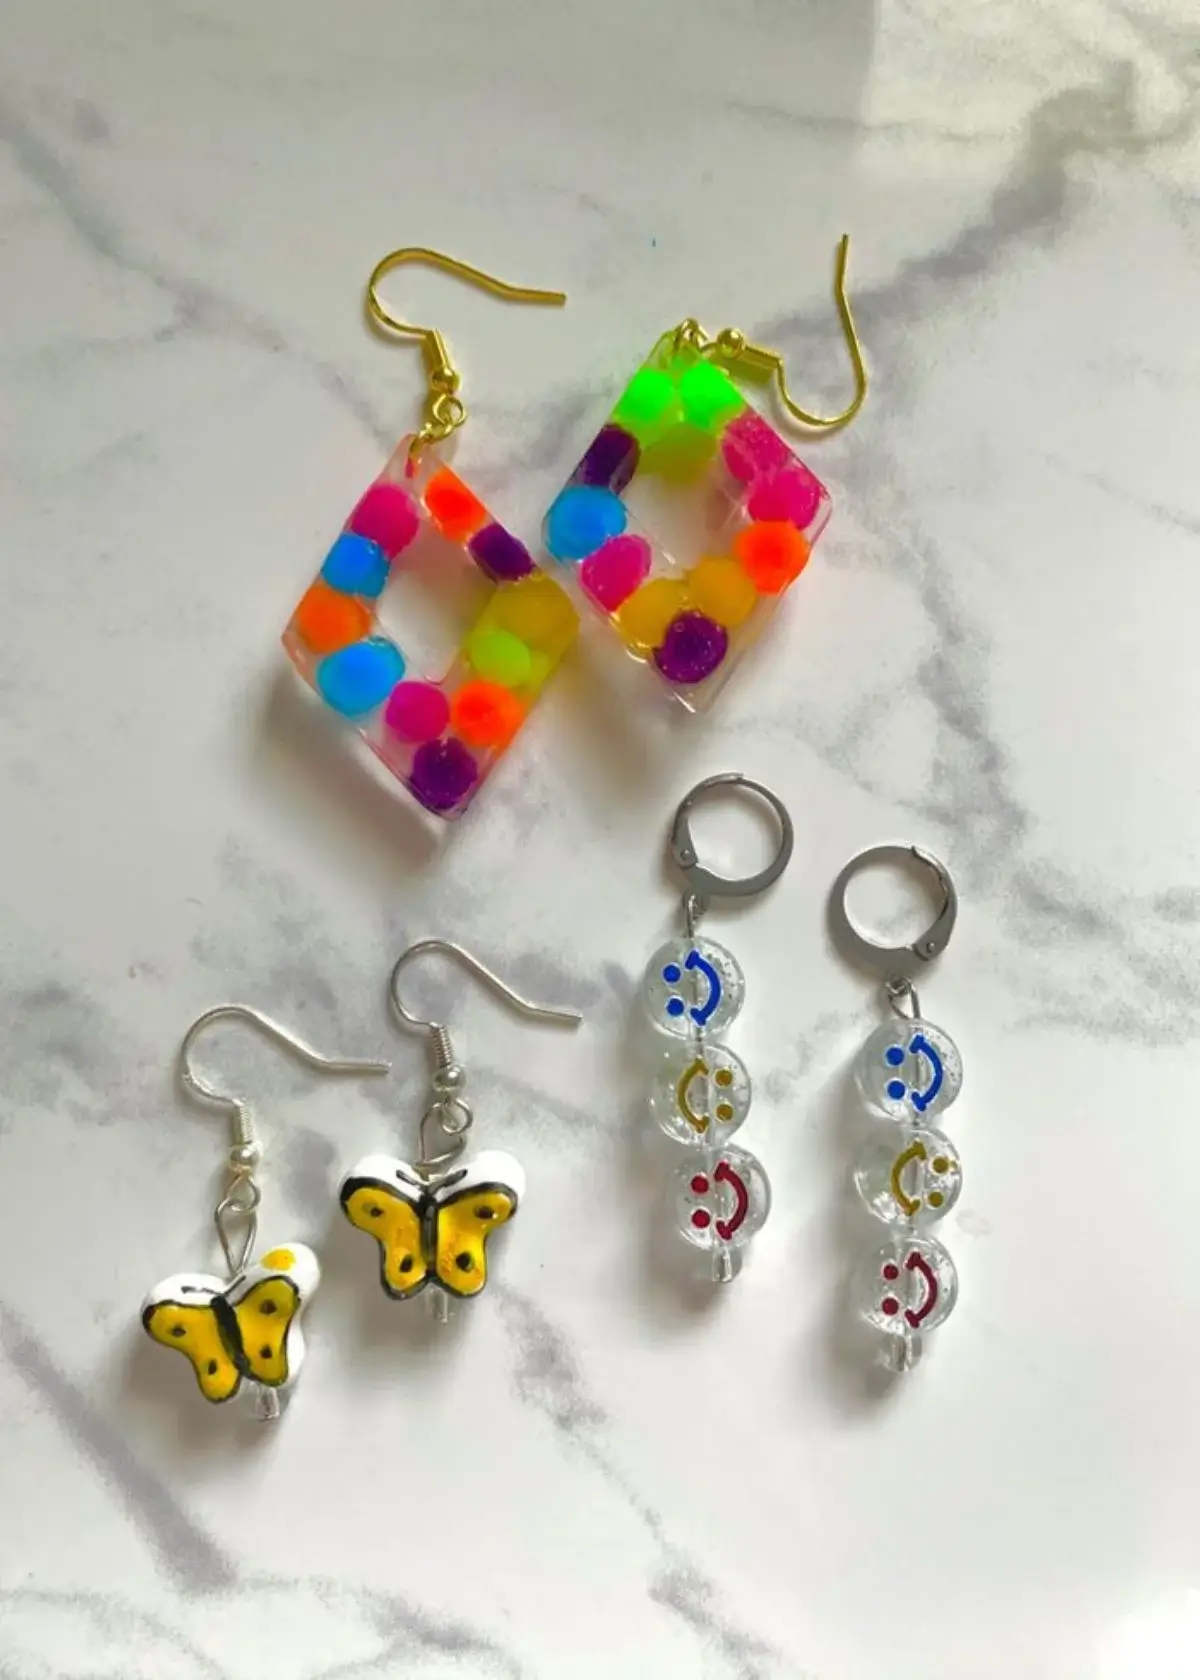 How to choose the right indie earrings?